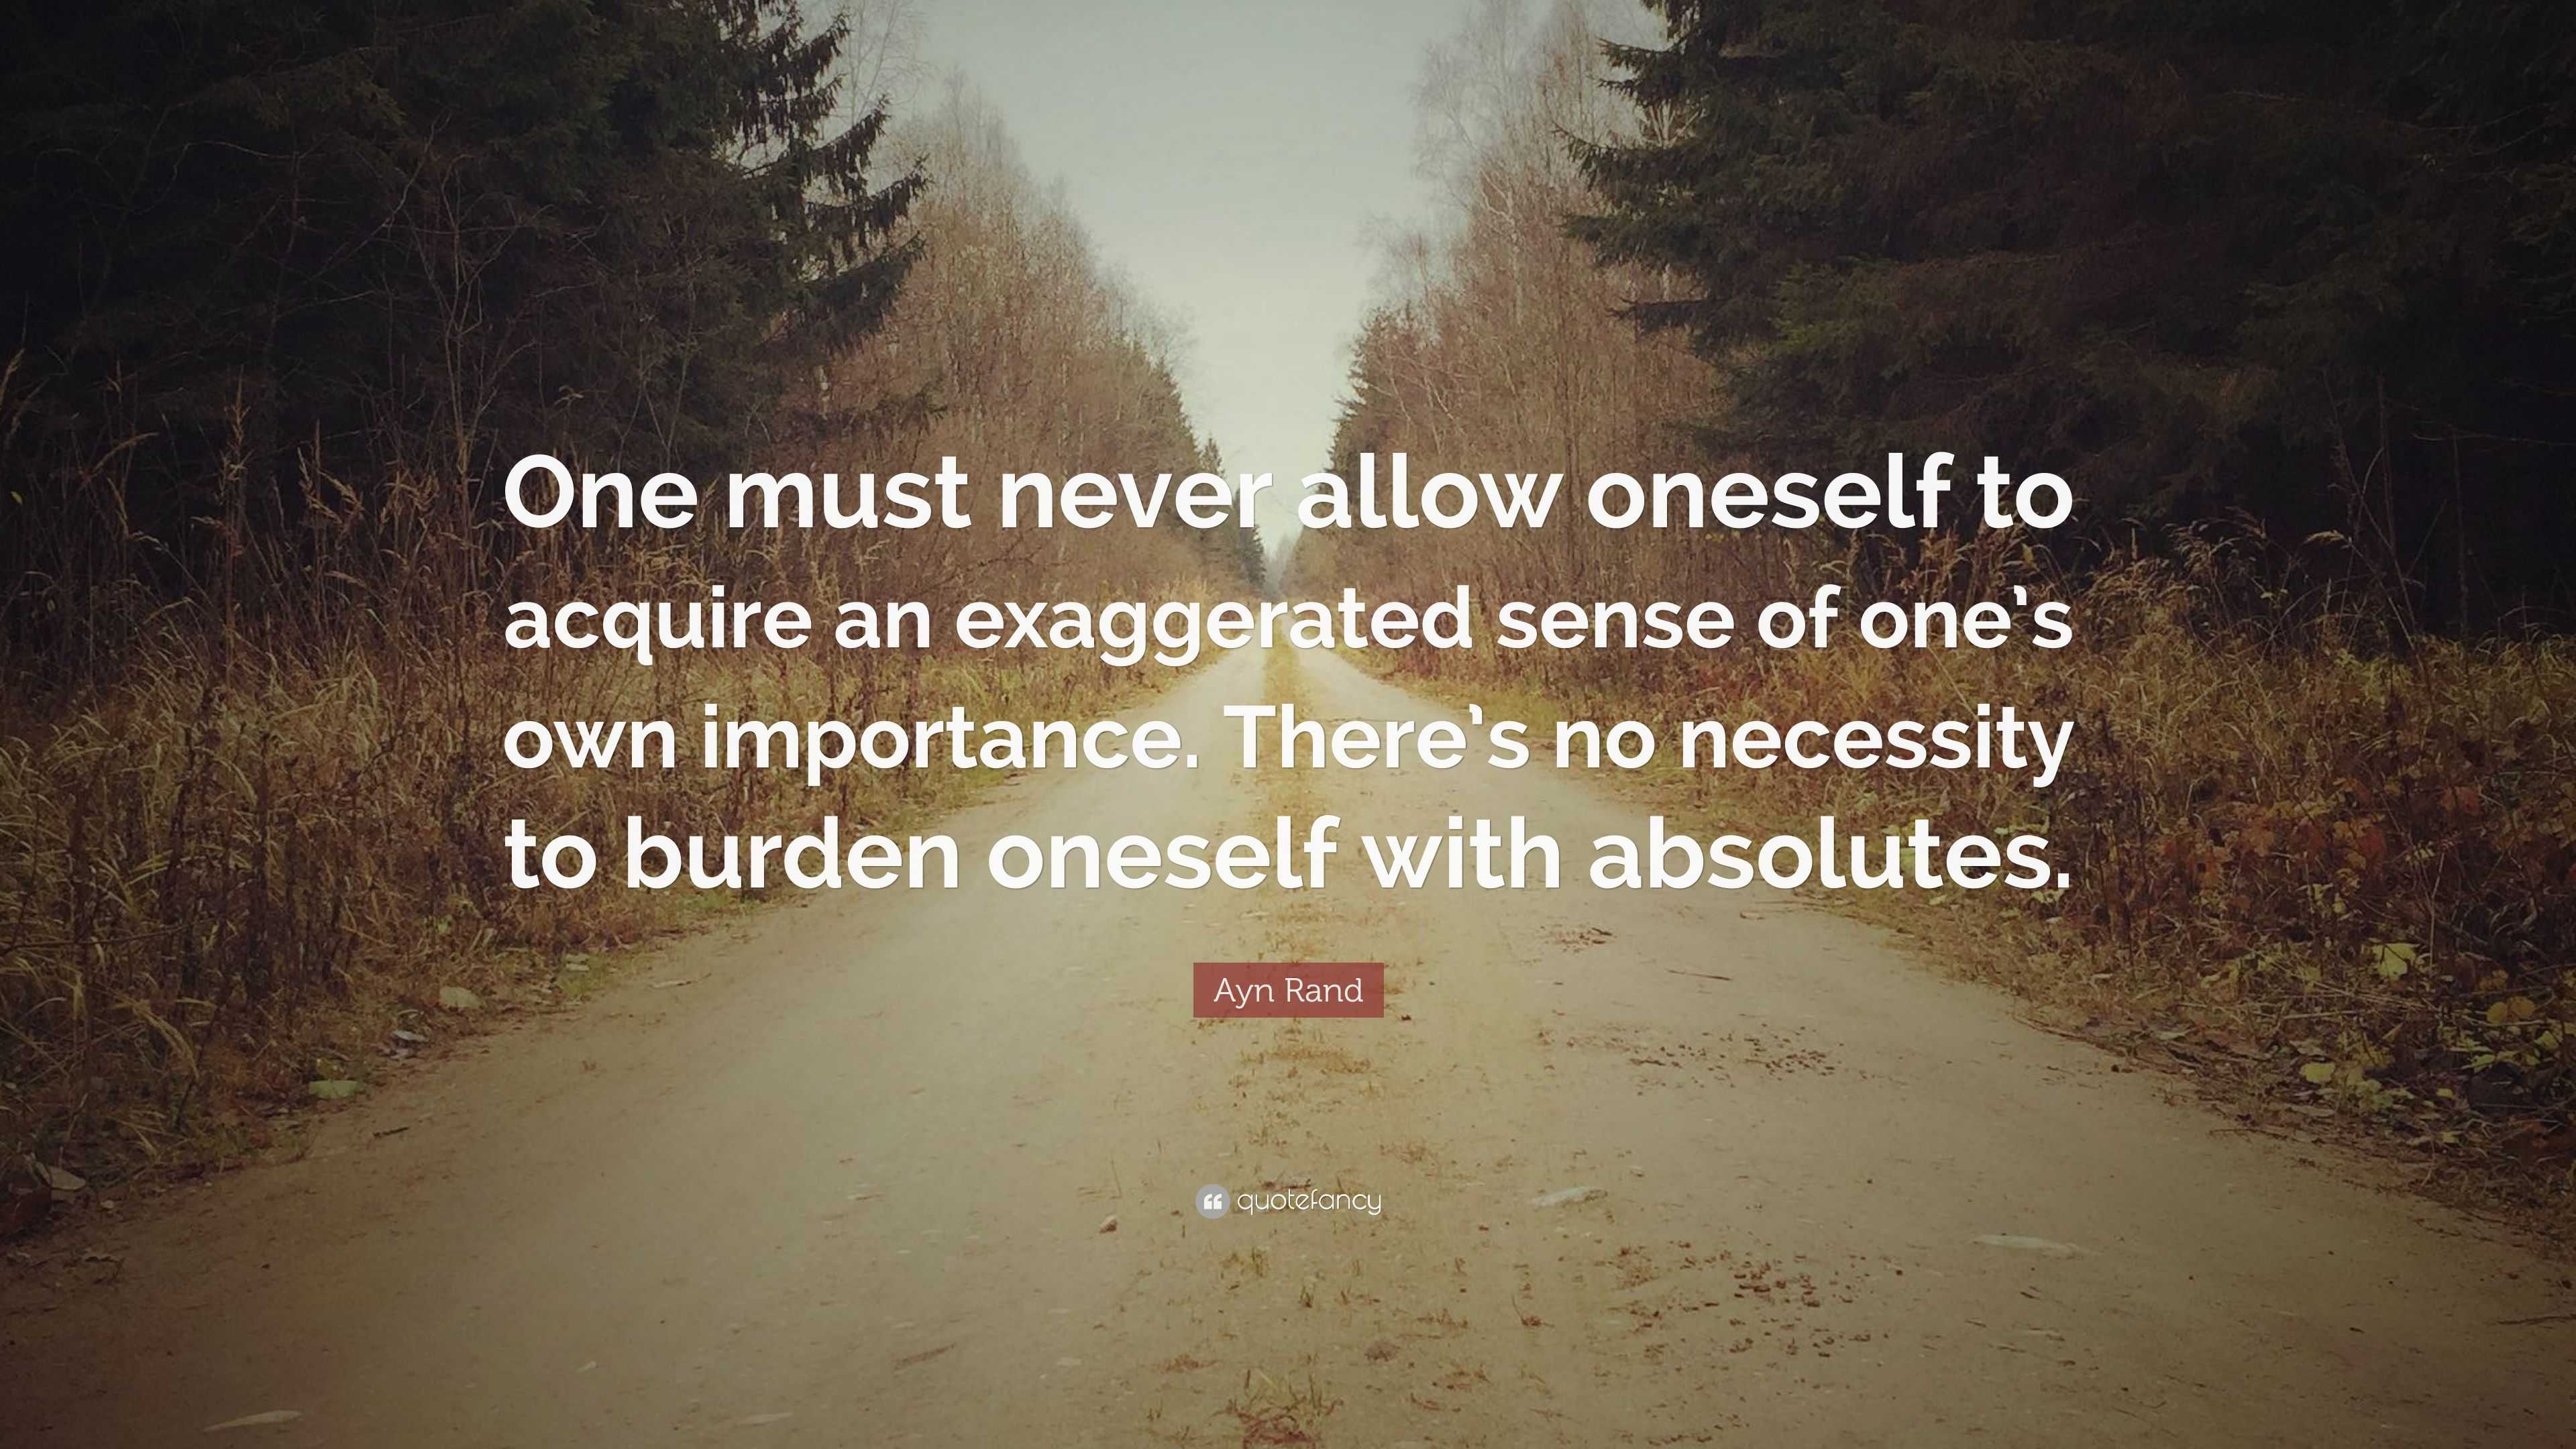 Ayn Rand Quote: “One must never allow oneself to acquire an exaggerated ...